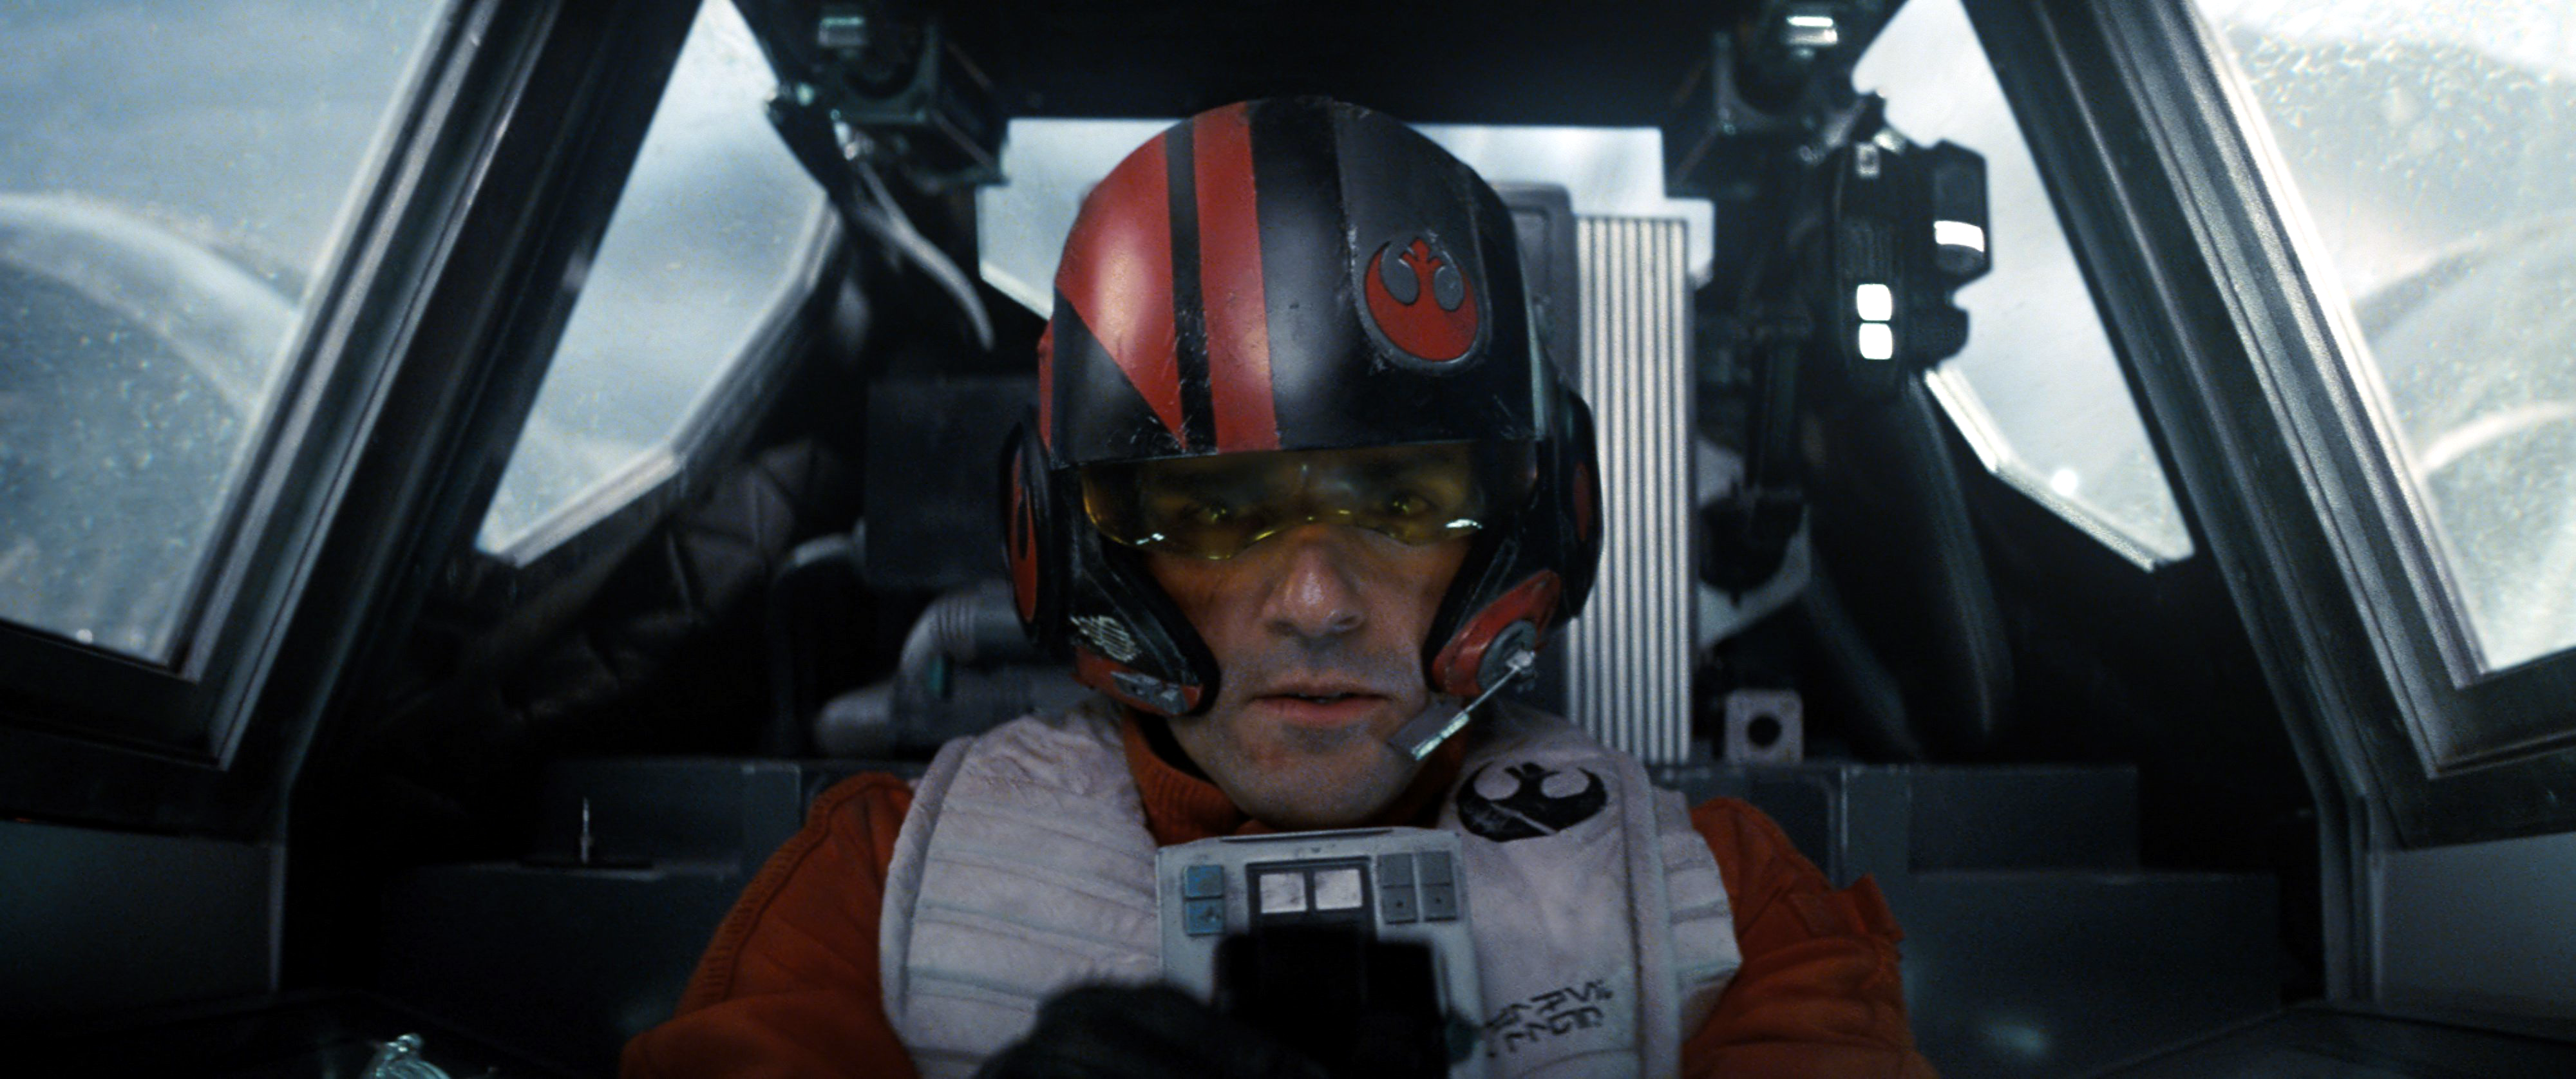 https://static.wikia.nocookie.net/starwars/images/4/43/Episode_VII_Rebel_Alliance_Pilot.png/revision/latest?cb=20160122045057